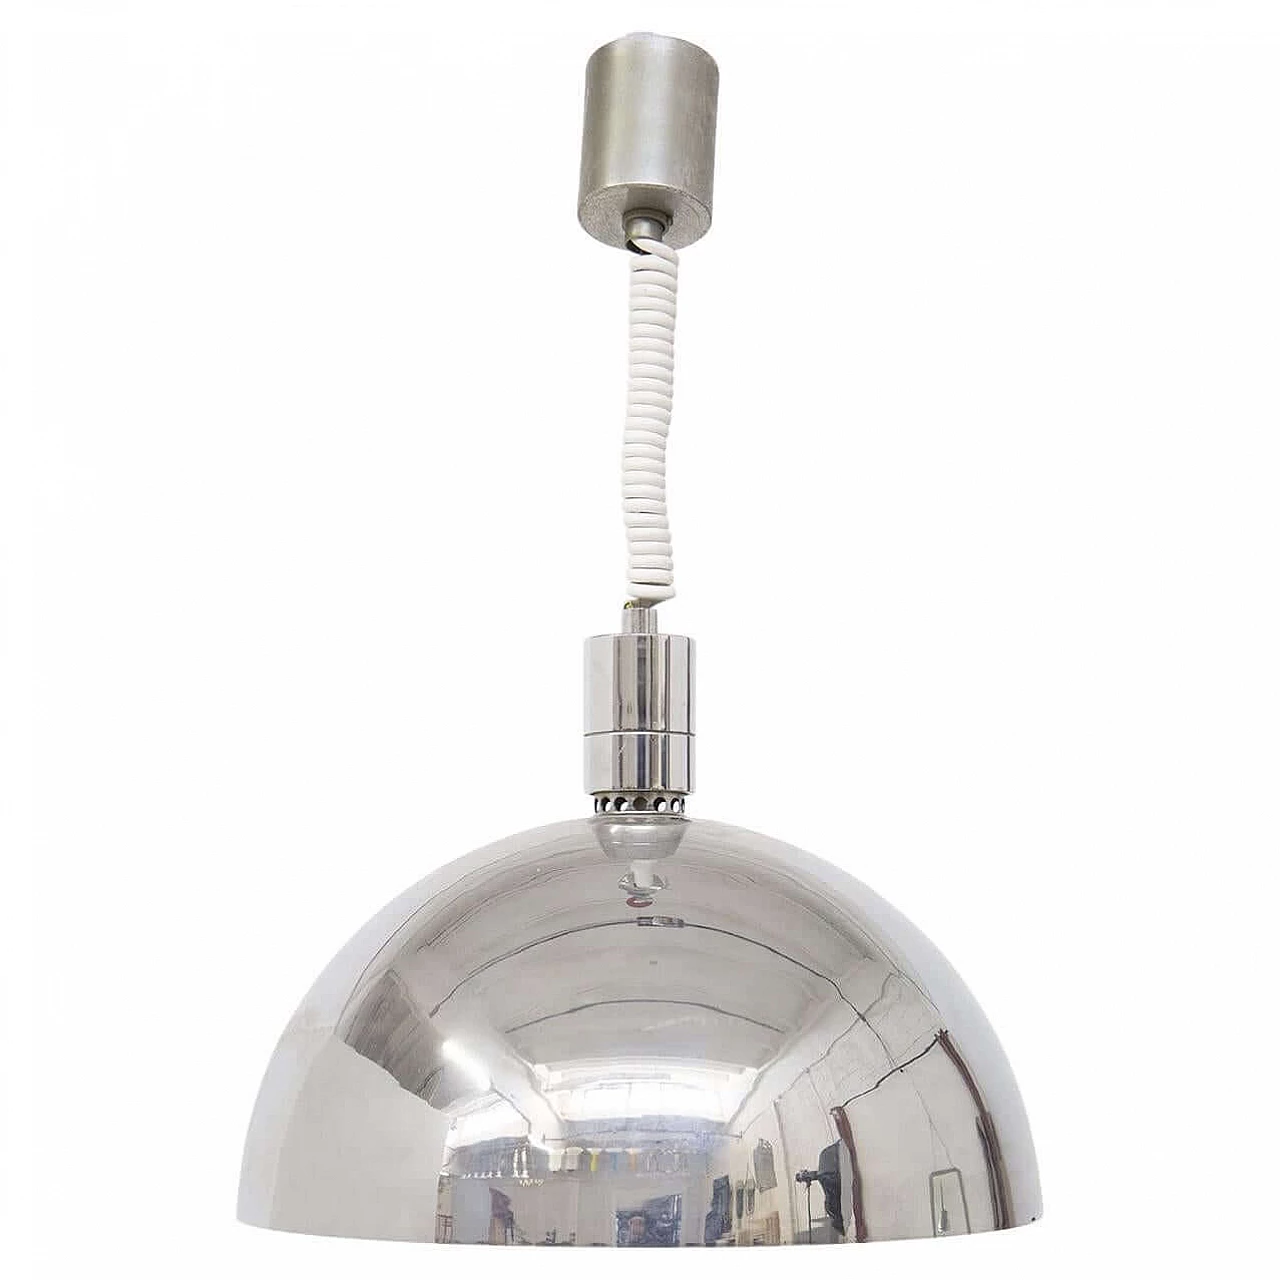 Am4z ceiling lamp by Albini and Helg for Sirrah, 1950s 1466961